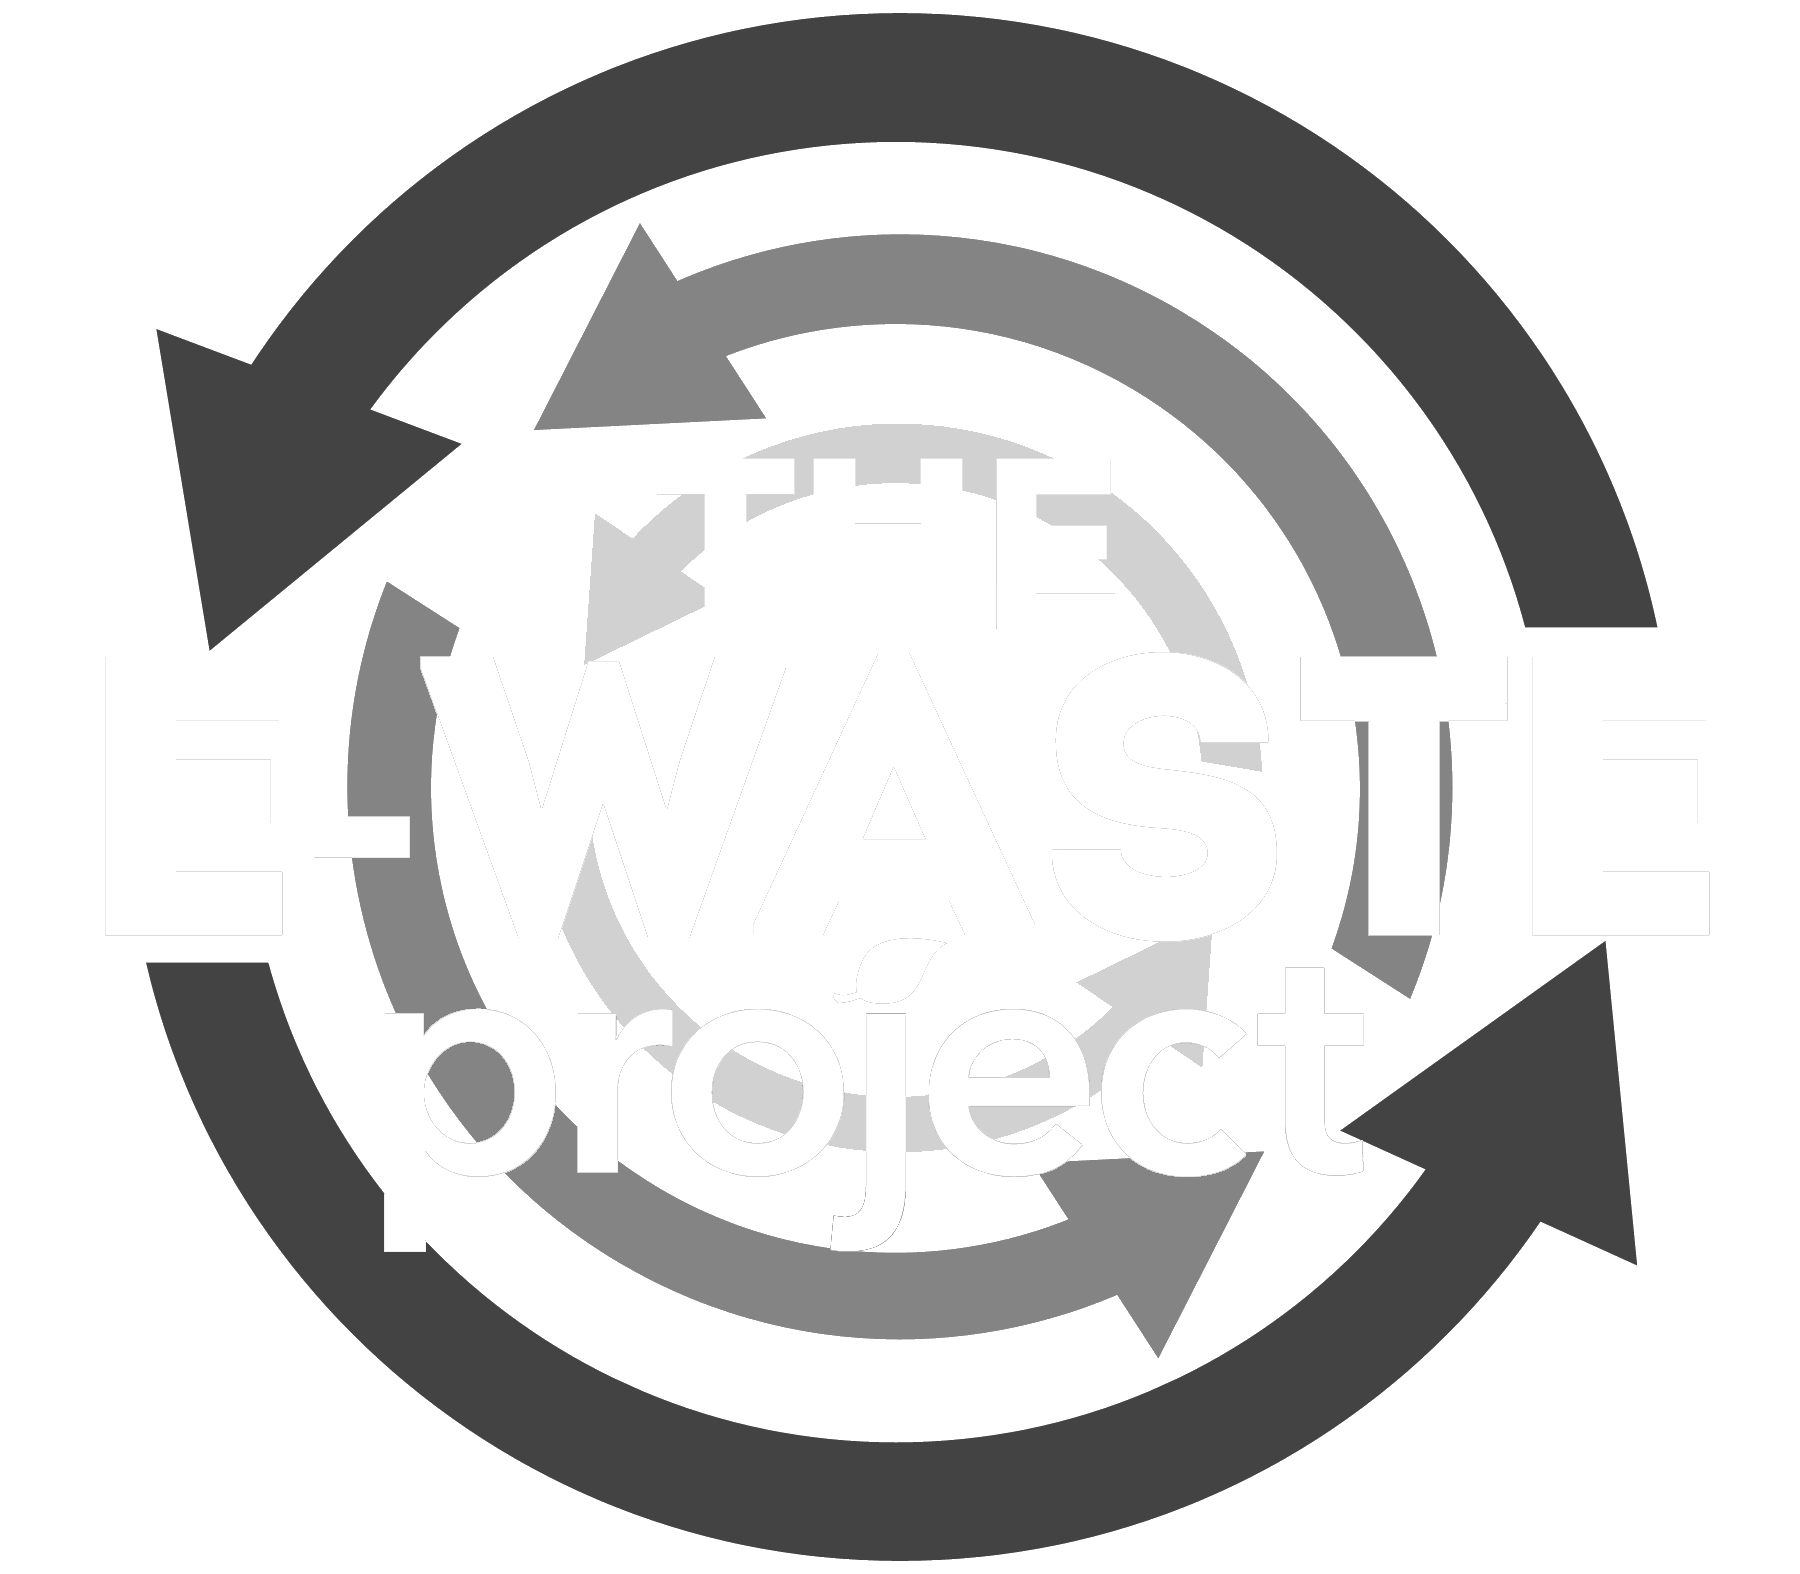 The E-Waste Project logo